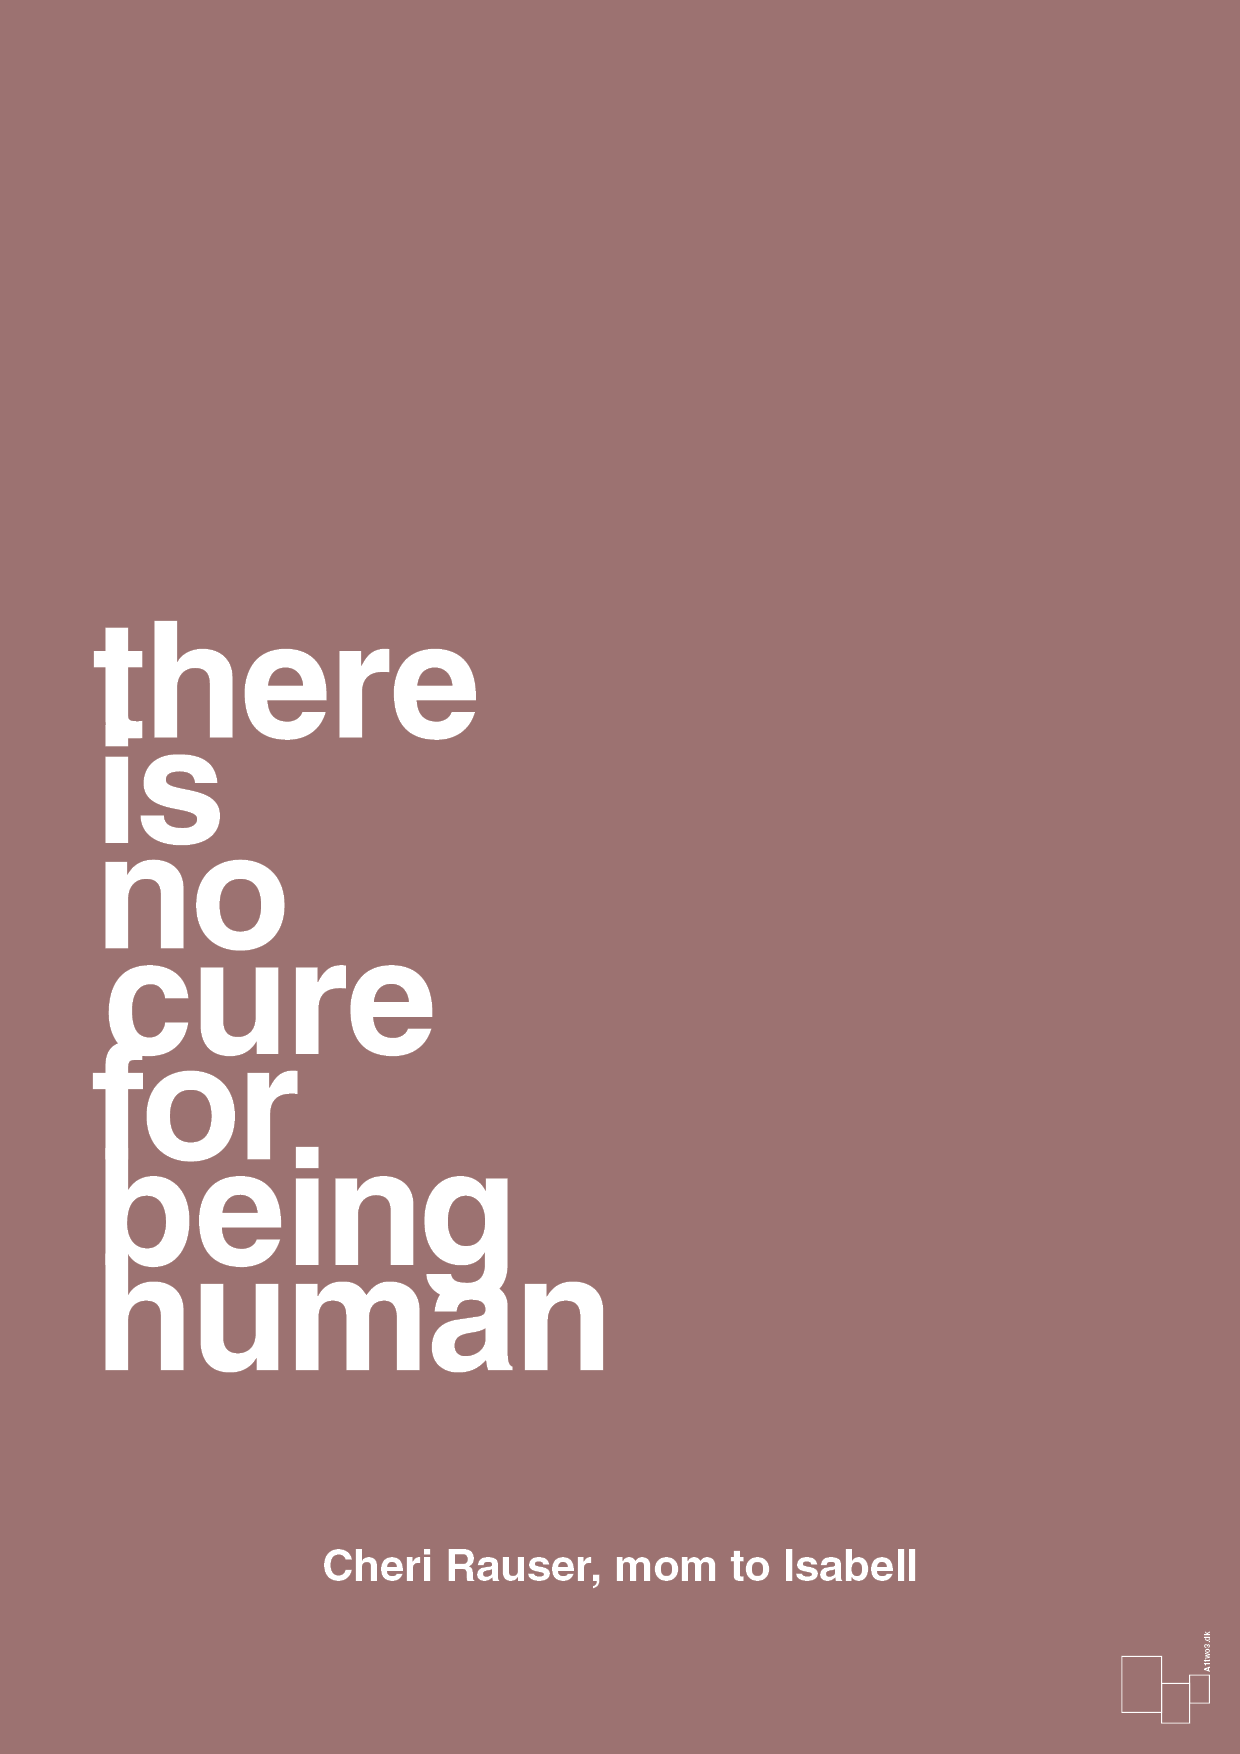 there is no cure for being human - Plakat med Samfund i Plum